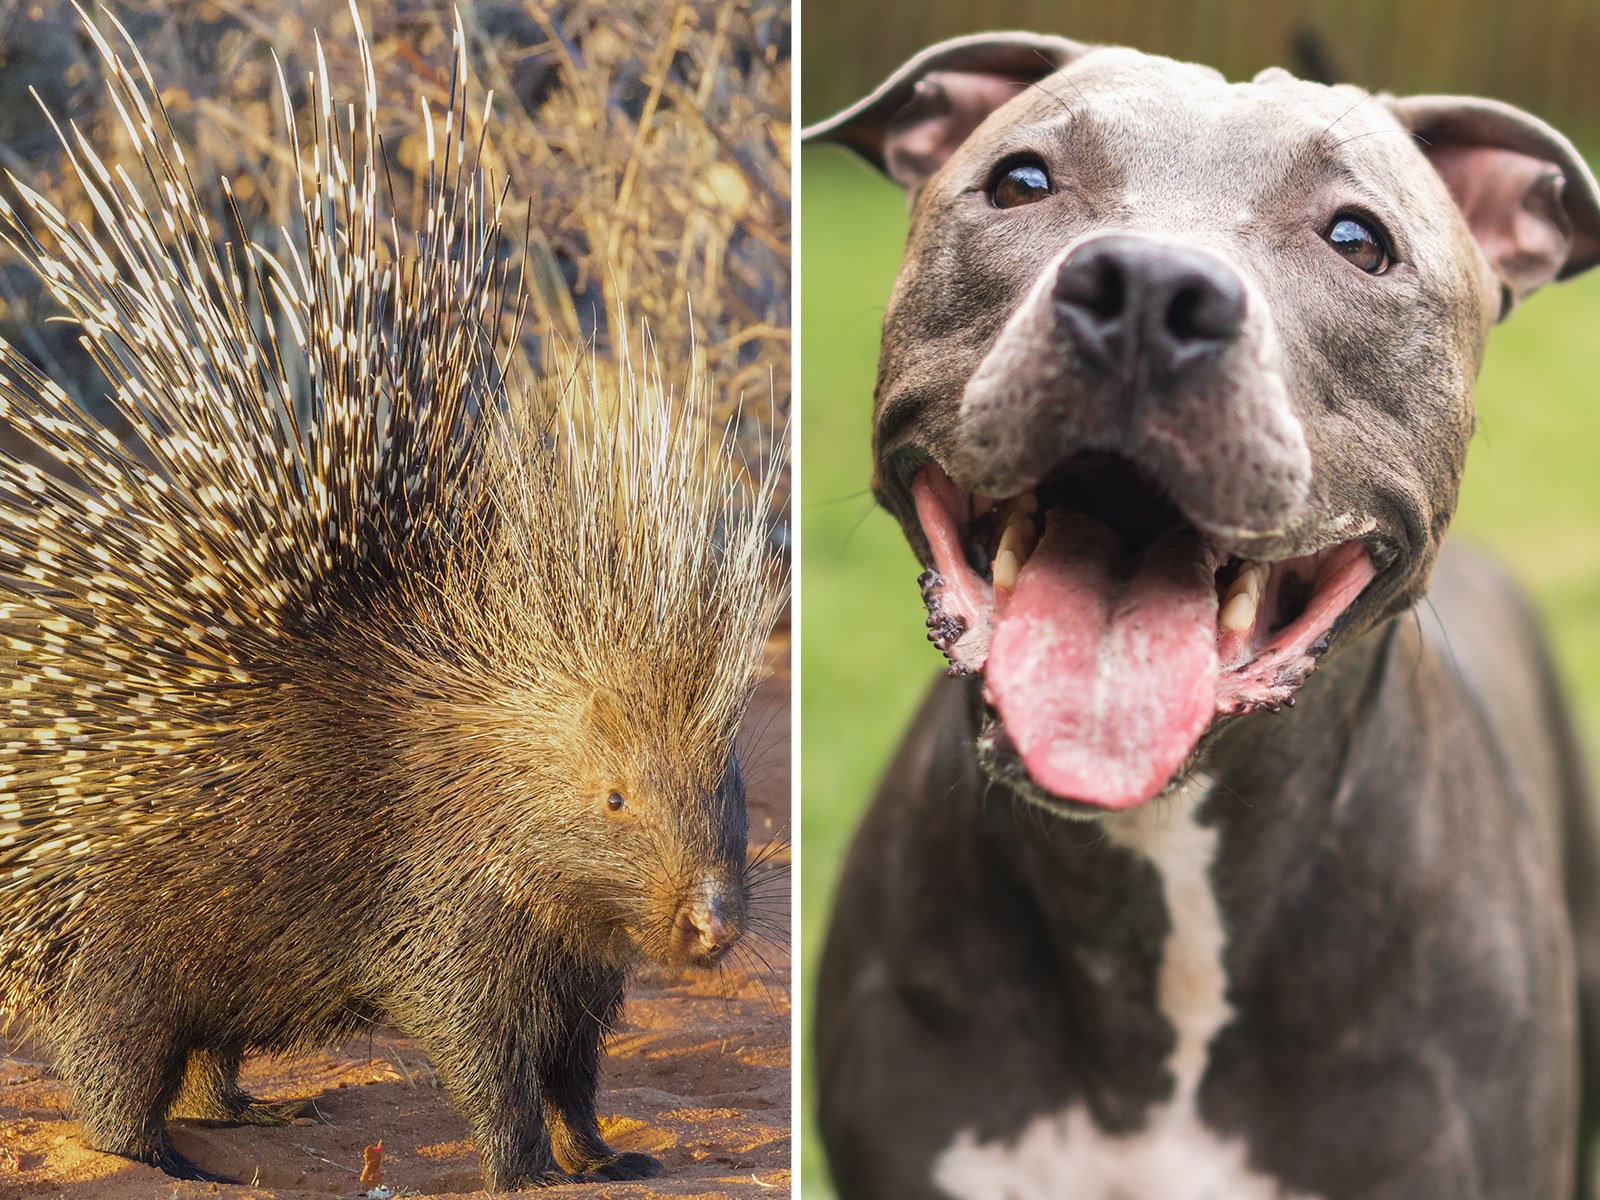 Pit Bull Dies After 2 A.M. Tussle With Porcupine Leaves Quills Inside Body